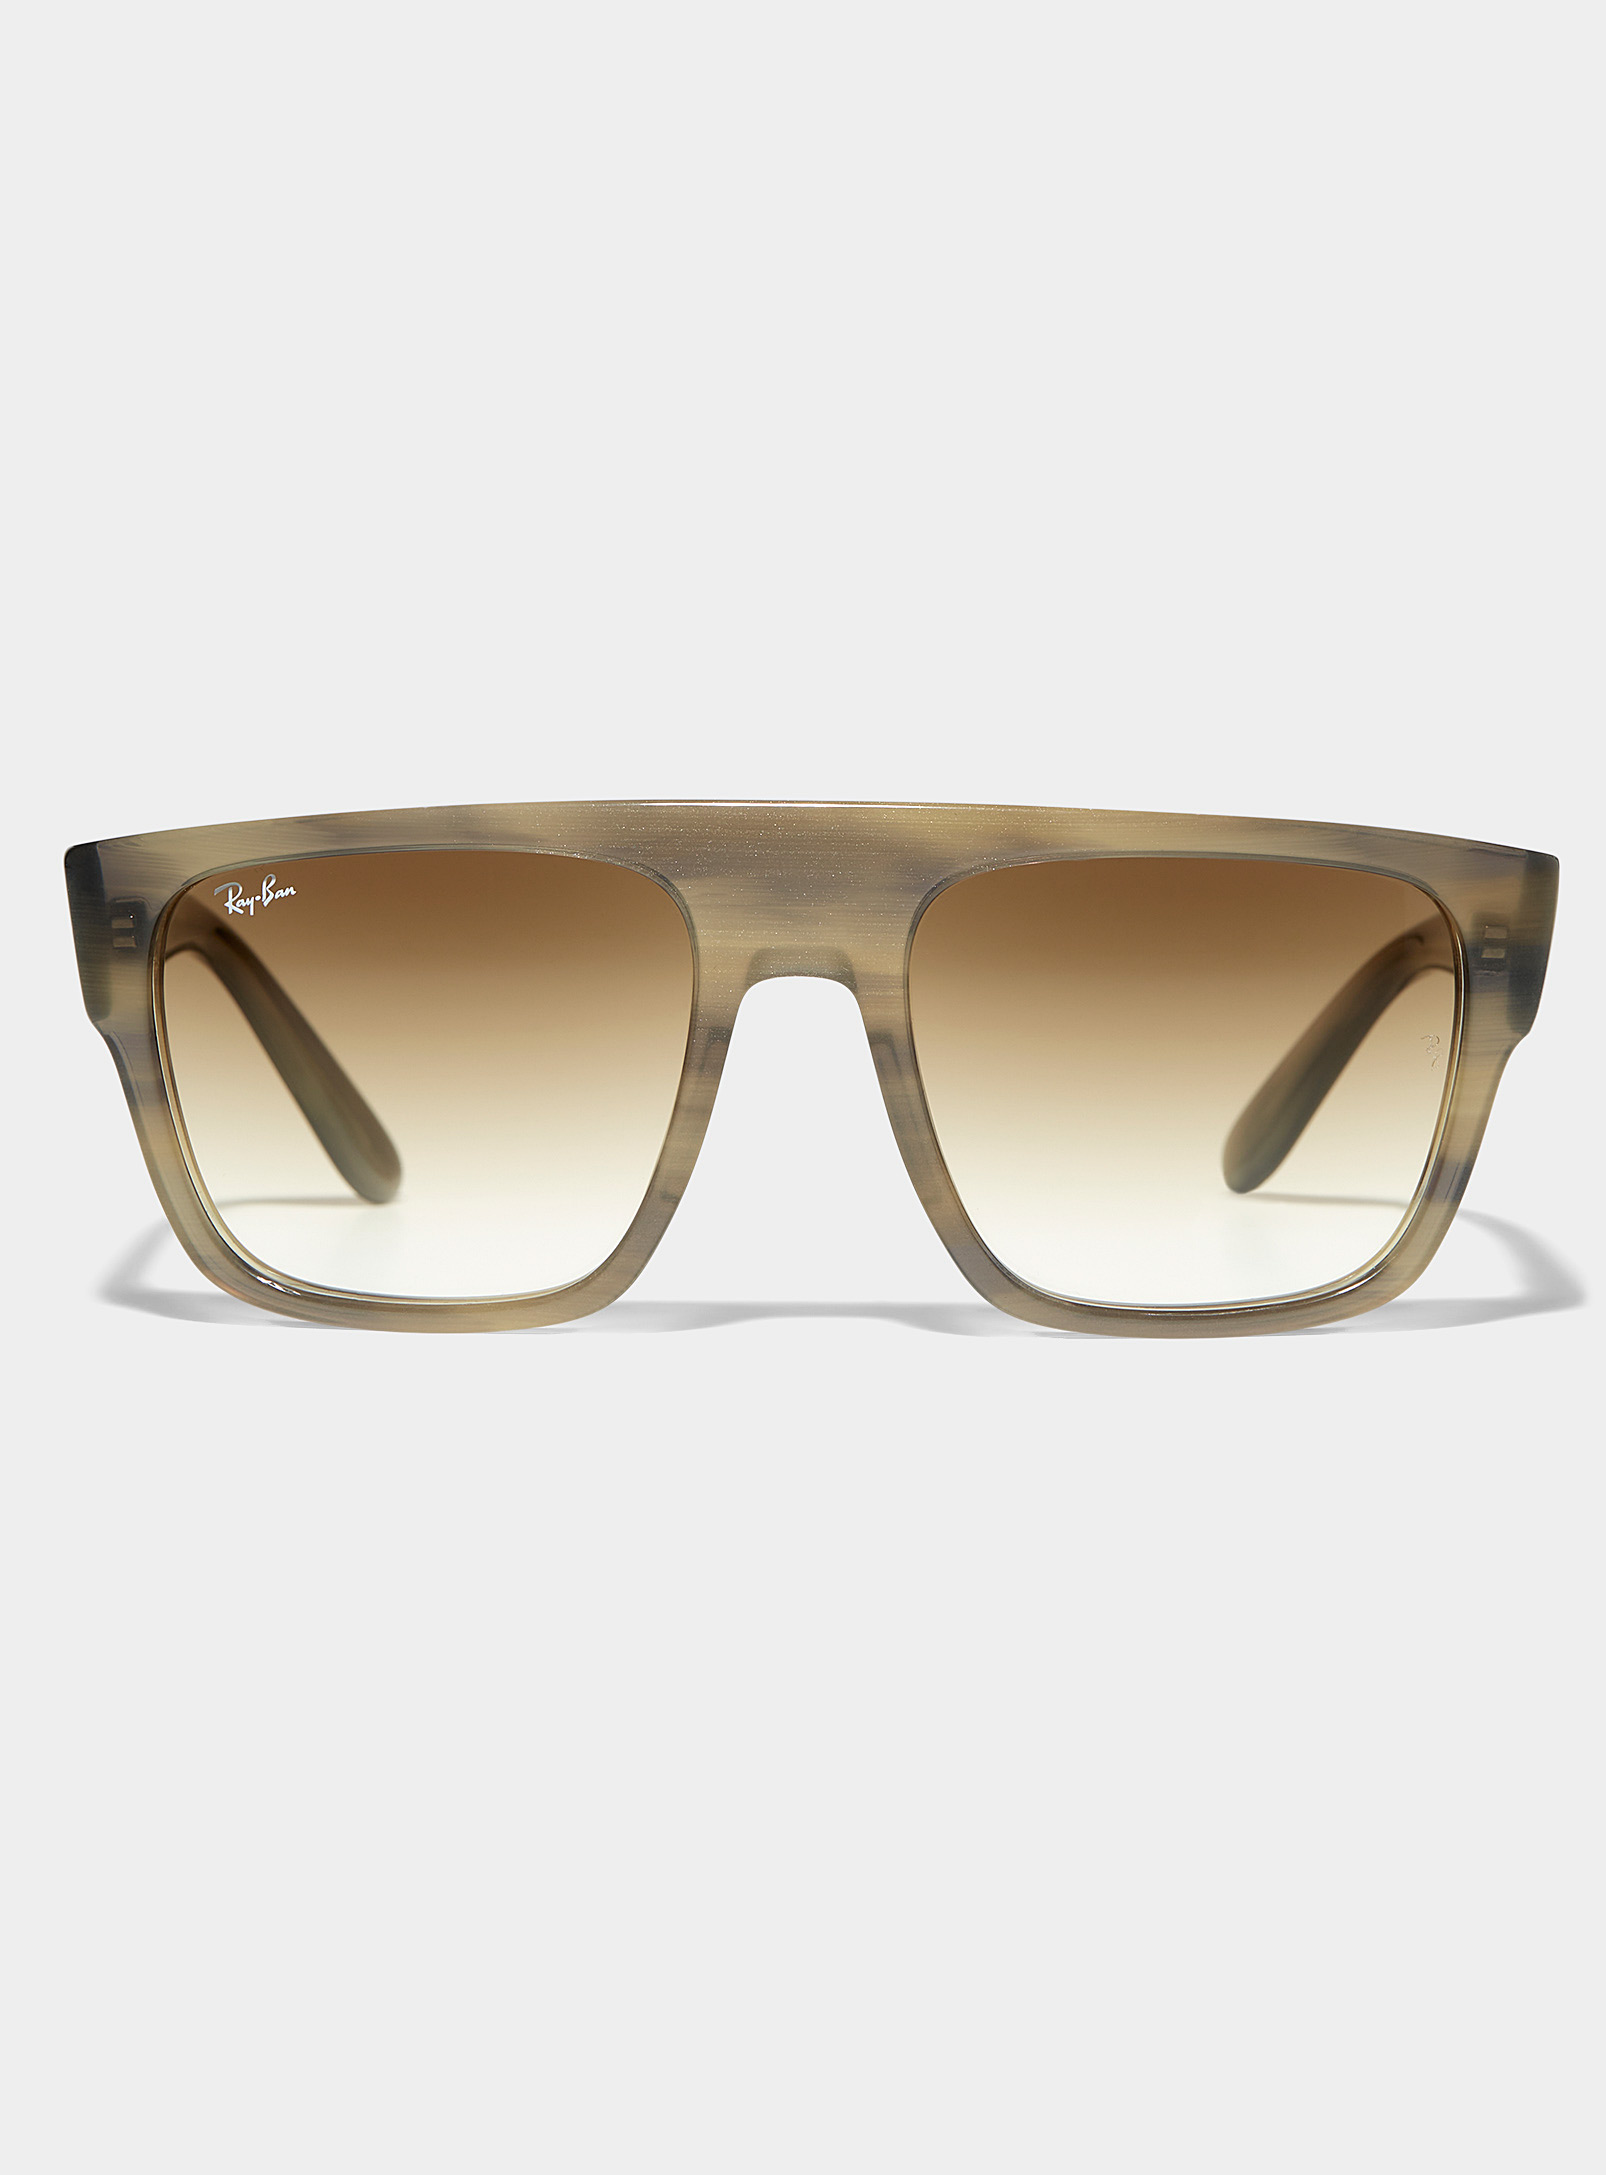 Ray Ban Drifter Square Sunglasses In Brown